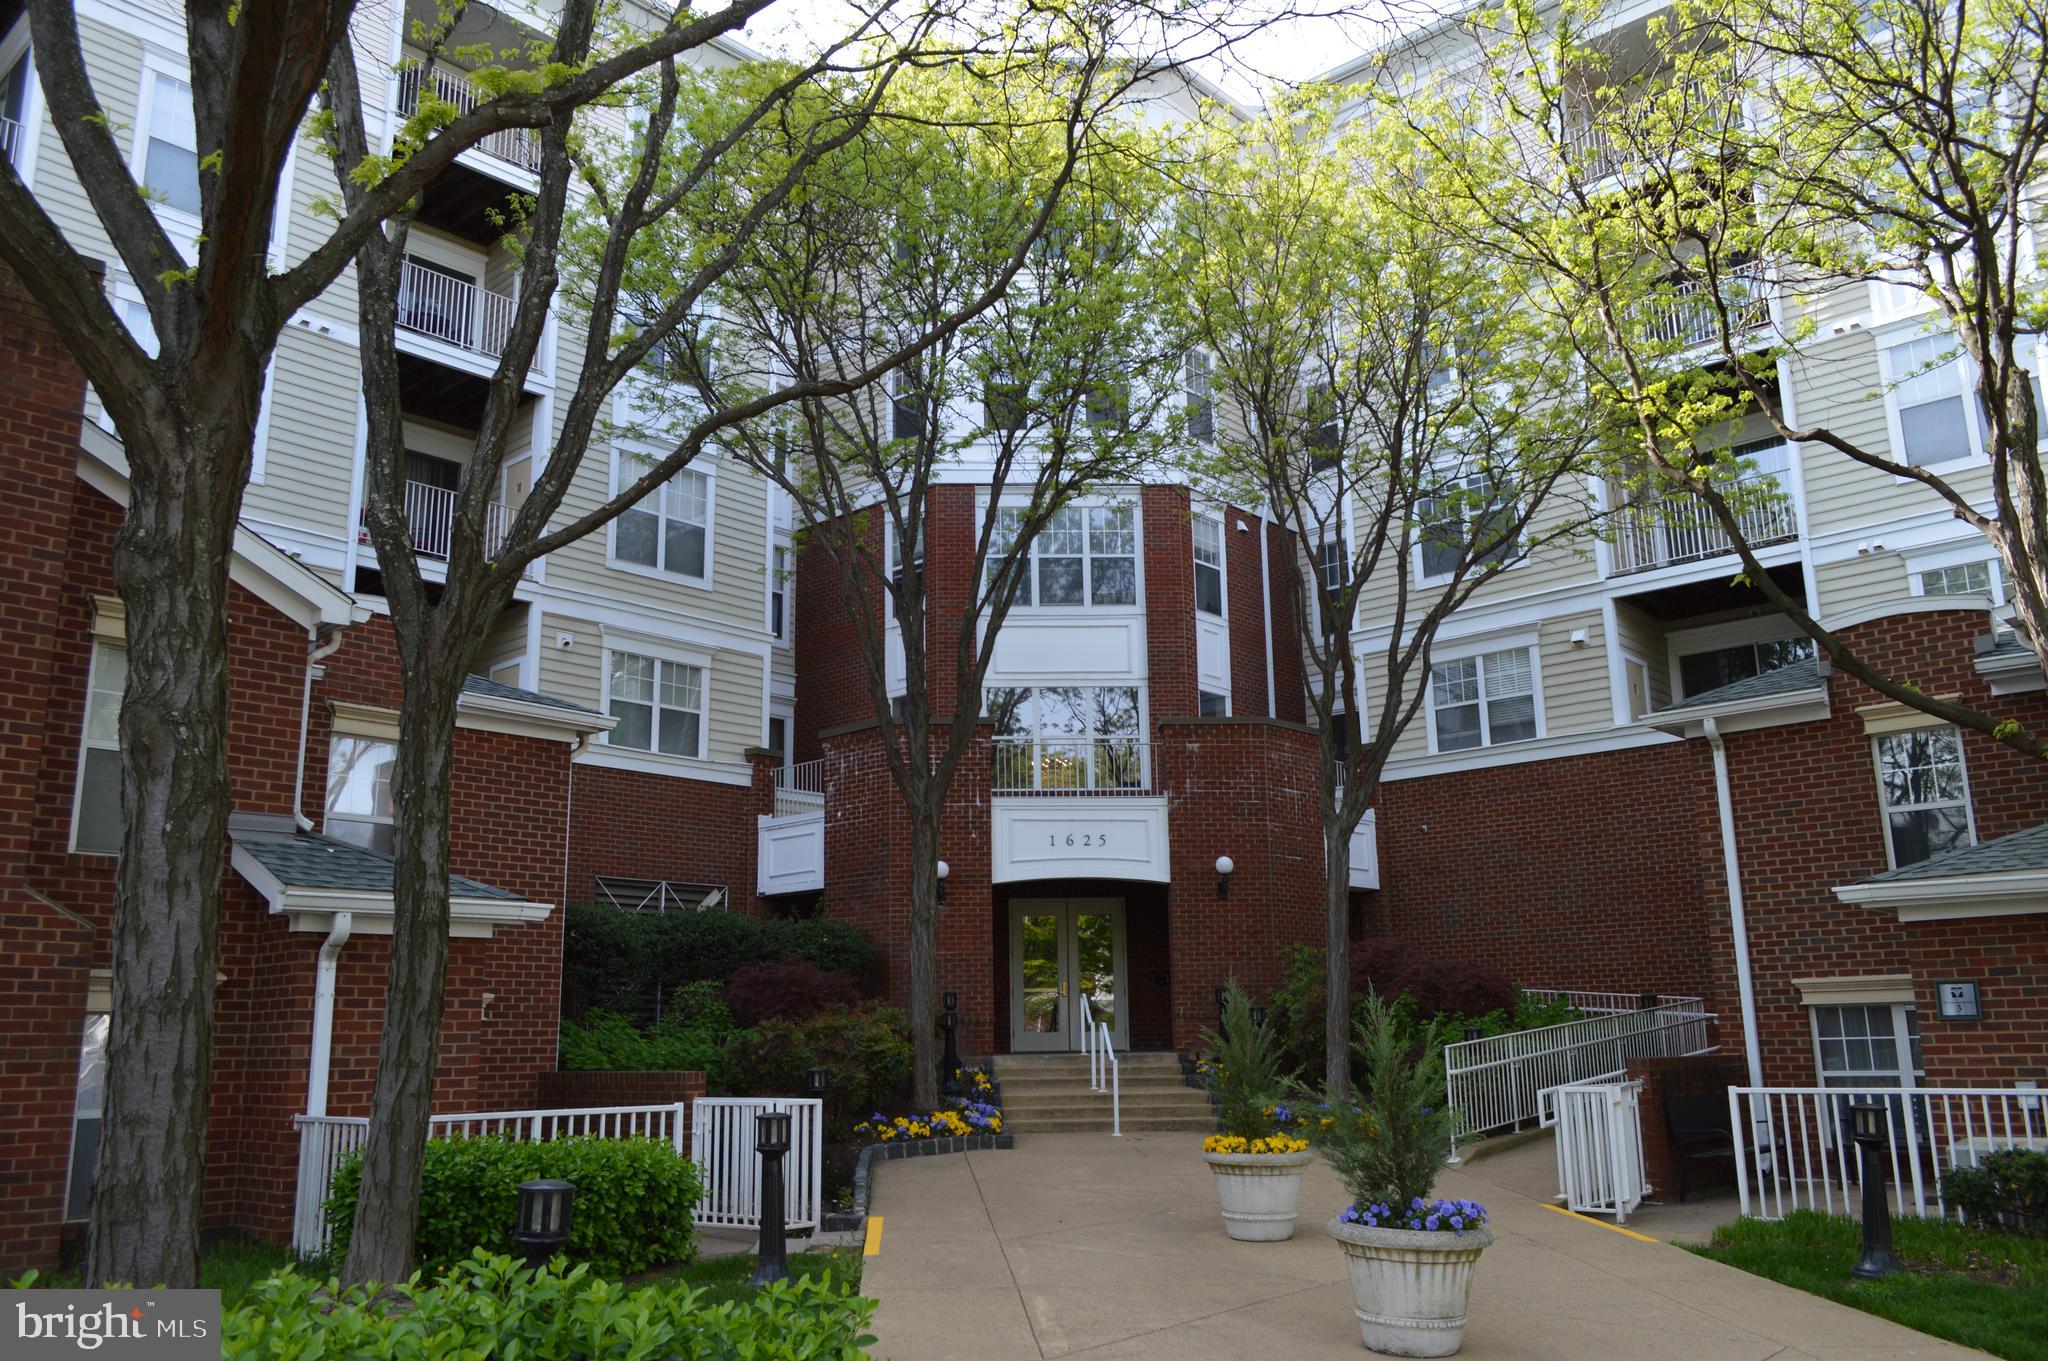 a front view of a multi story residential apartment buildings